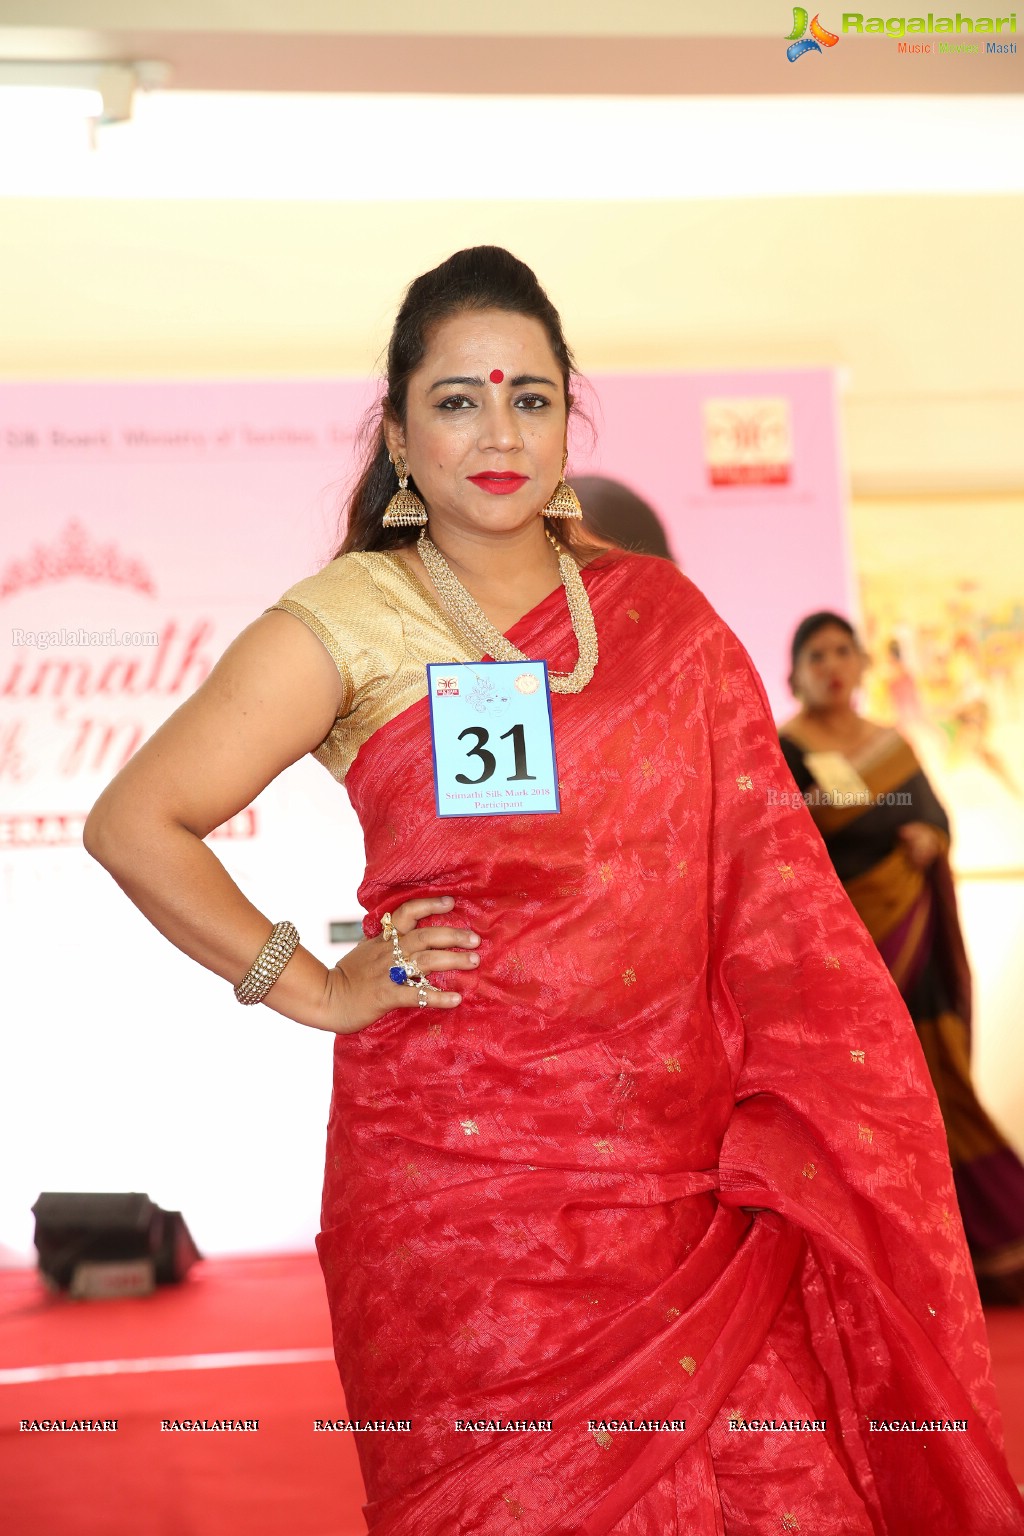 Srimathi Silk Mark Beauty Pageant Auditions 2018 at Central Silk Board, Jubilee Hills